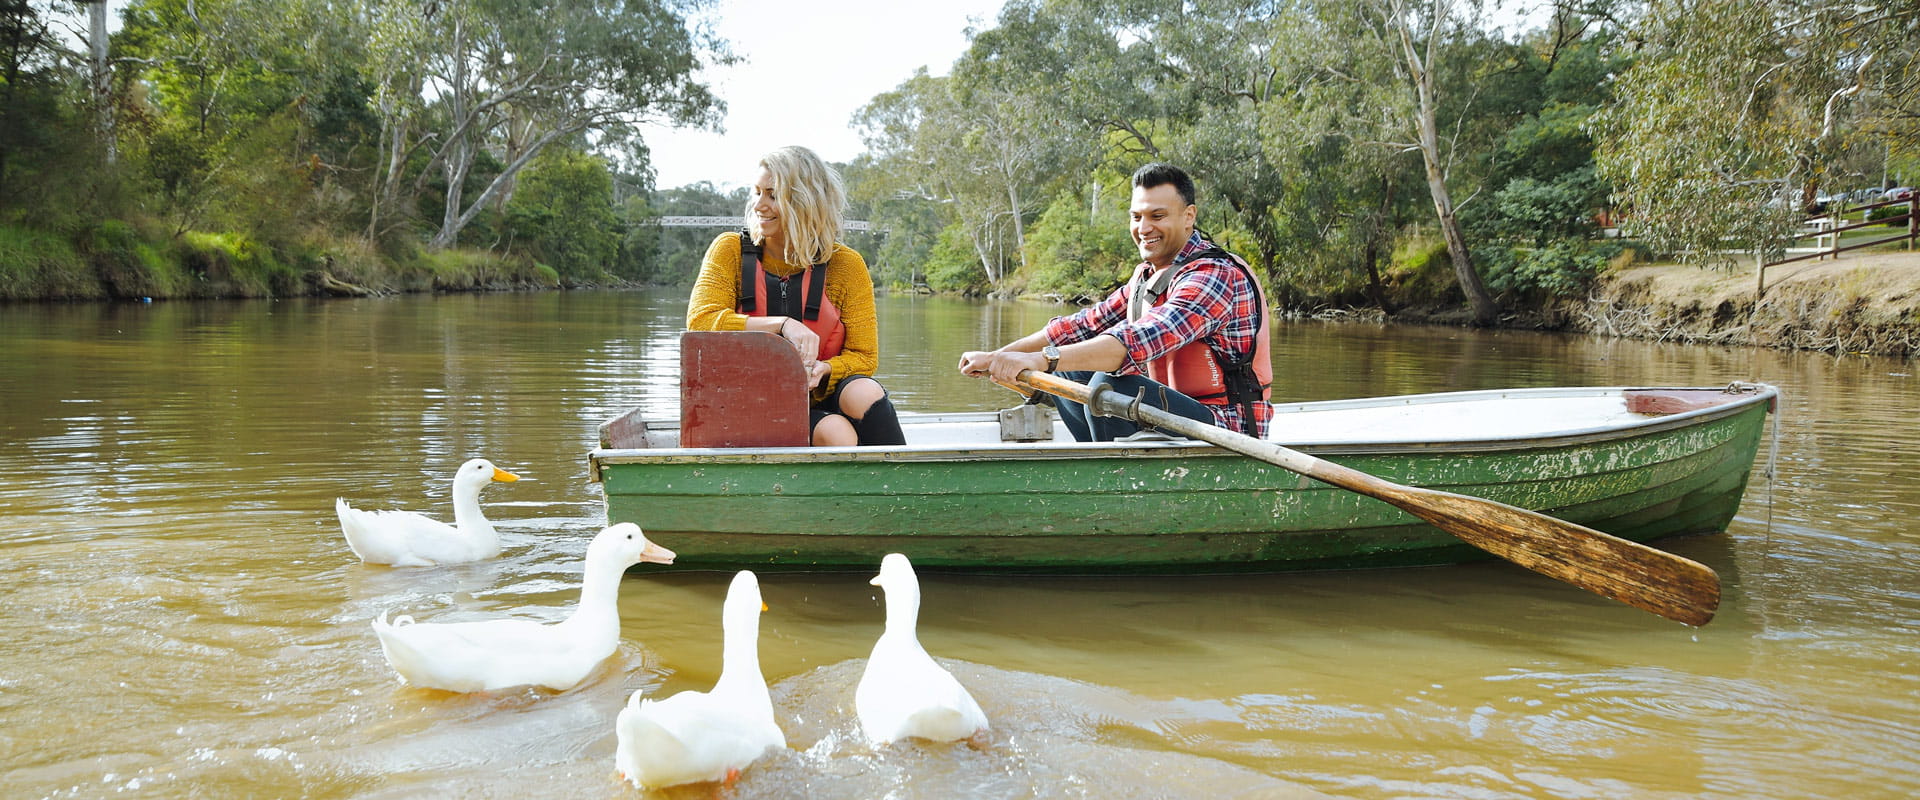 A woman and man wearing lifejackets sit in a small rowboat as four white ducks paddle around them in a river, with trees stretching out from the banks on either side.